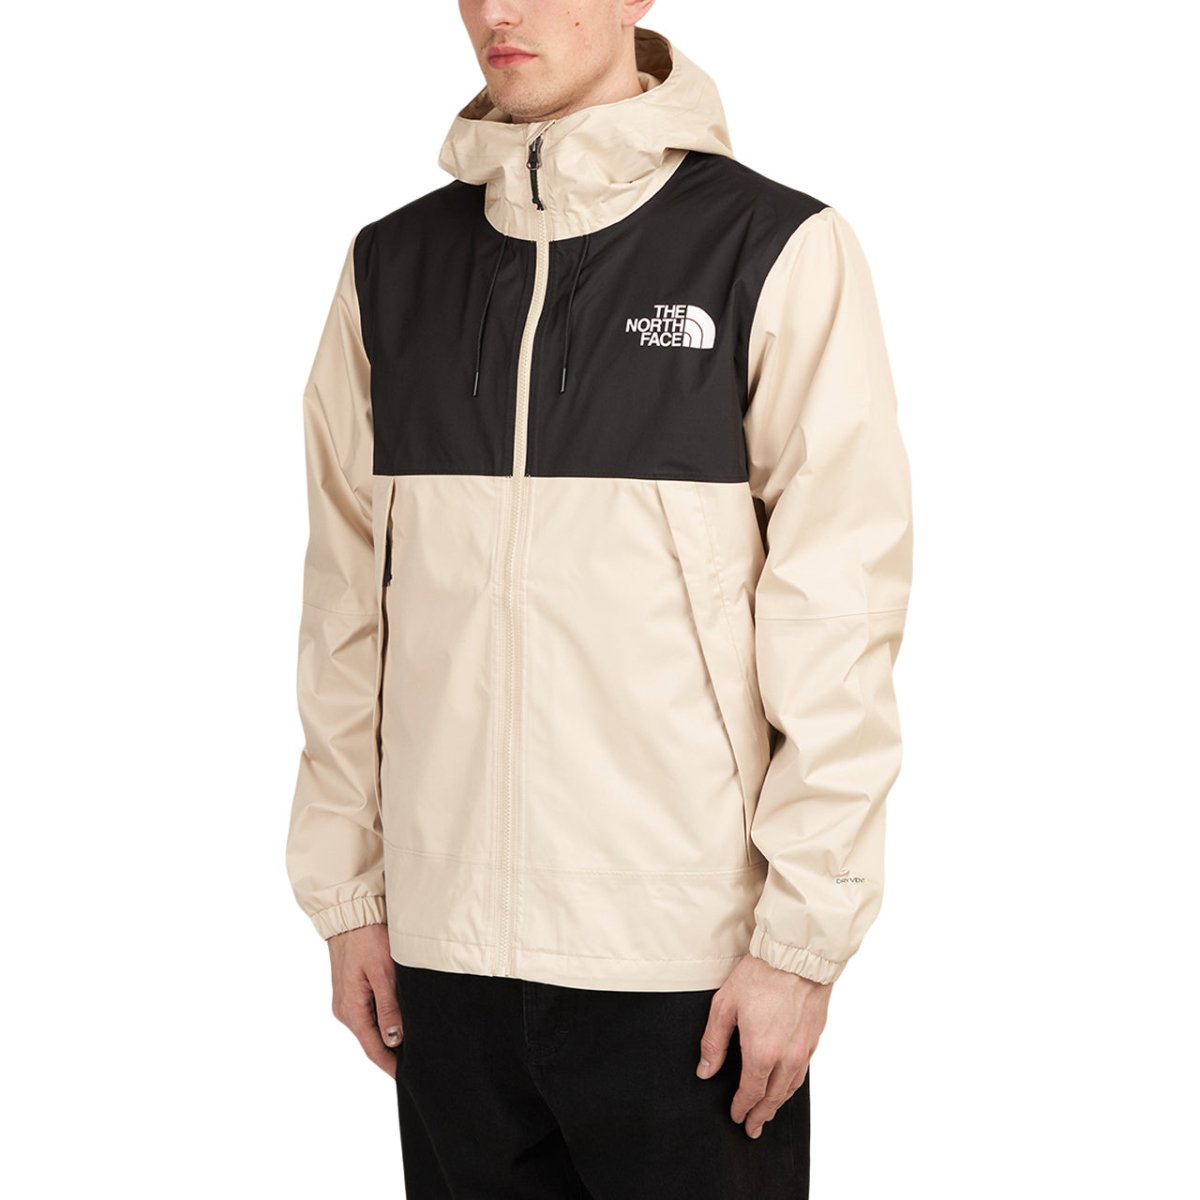 The North Face New Mountain Q Jacket (Schwarz / Beige)  - Allike Store